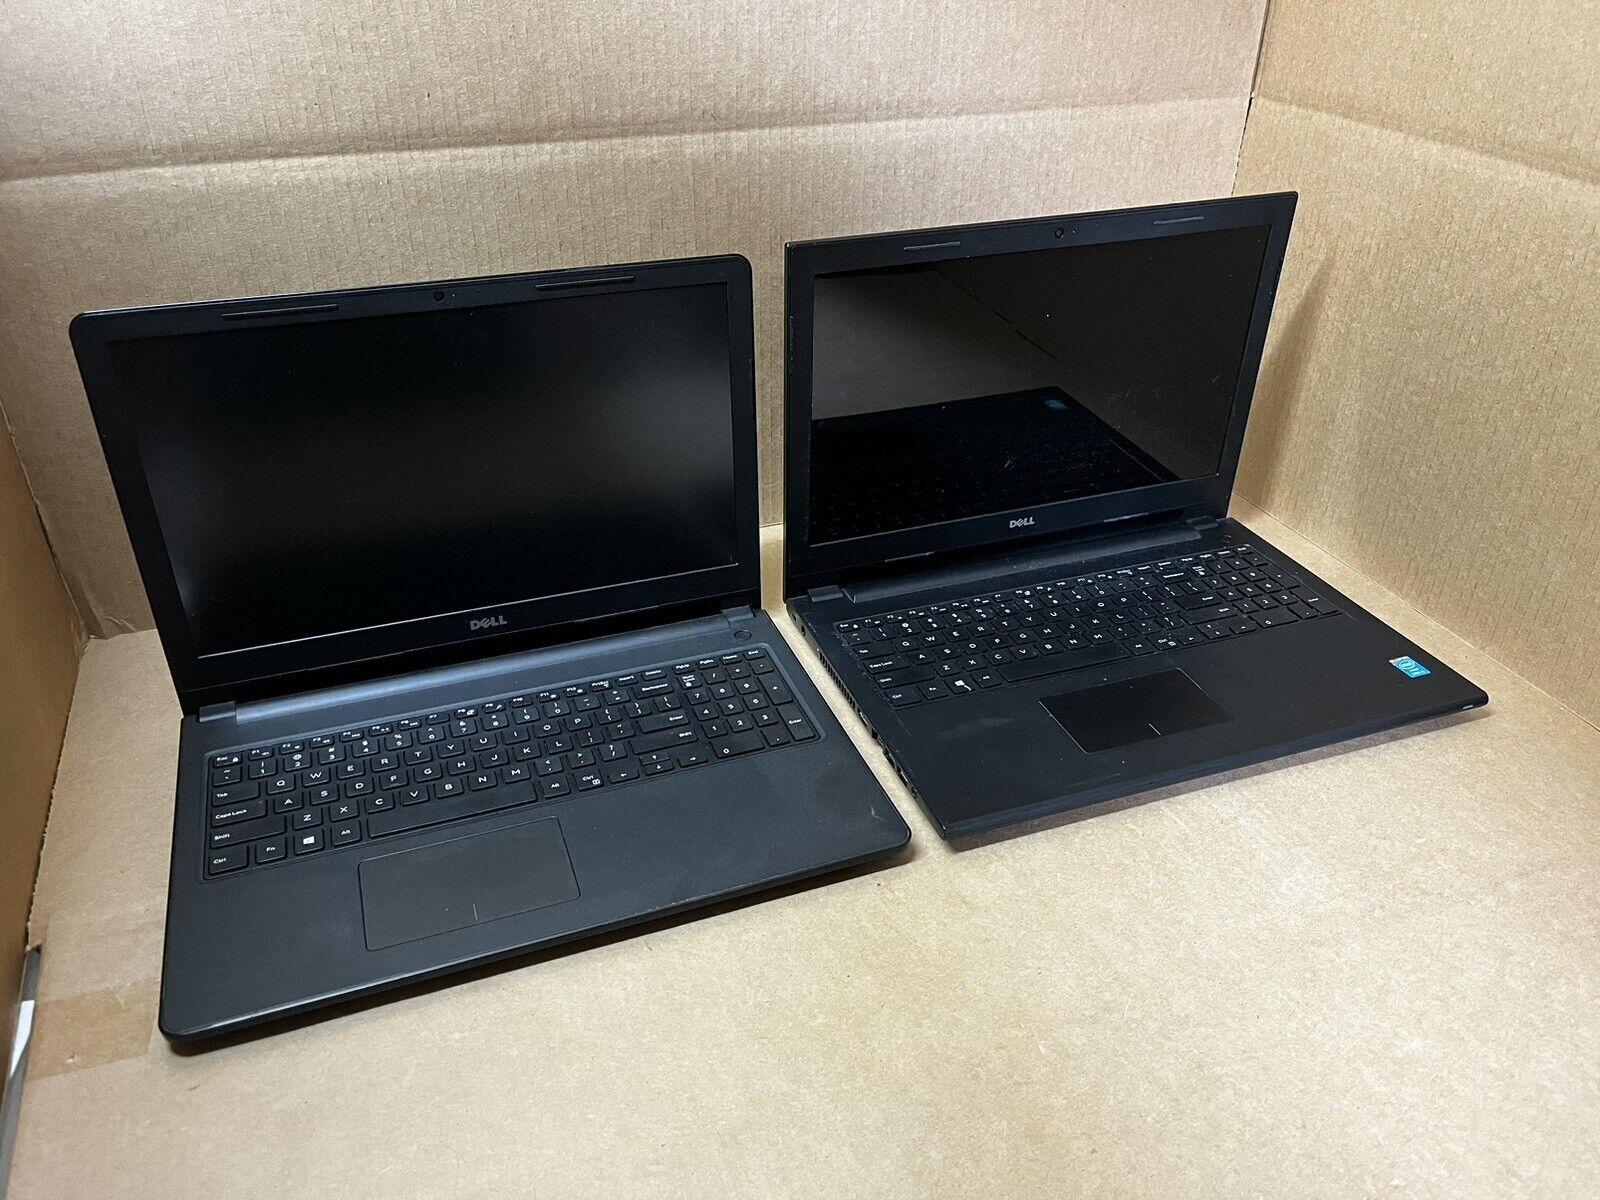 LOT OF 2: Dell Inspiron 5100 & 3878, Untested